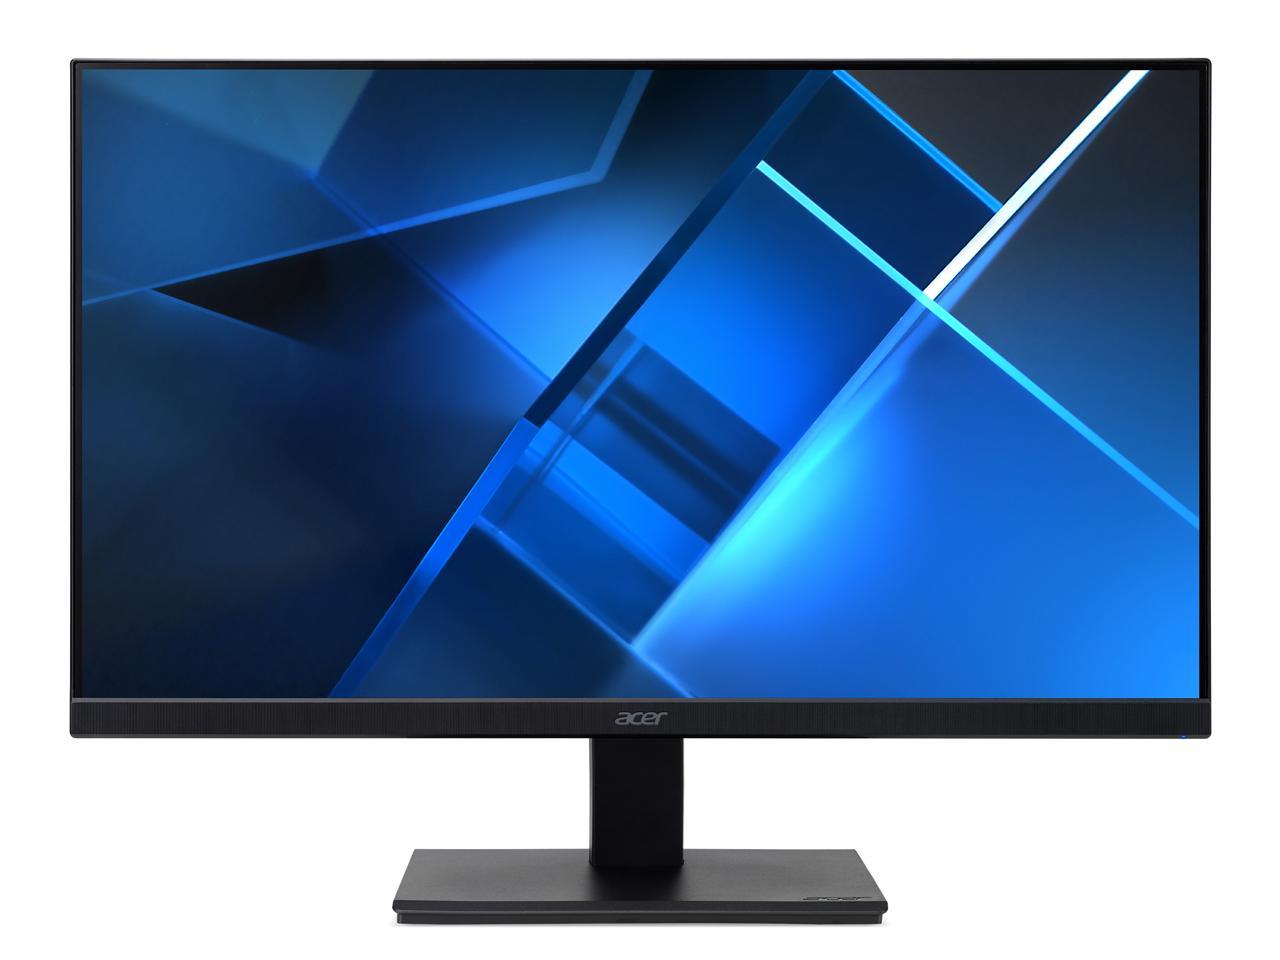 28" Acer V287K UHD IPS DCI-P3 90% HDR10 Monitor $180 + Free Shipping